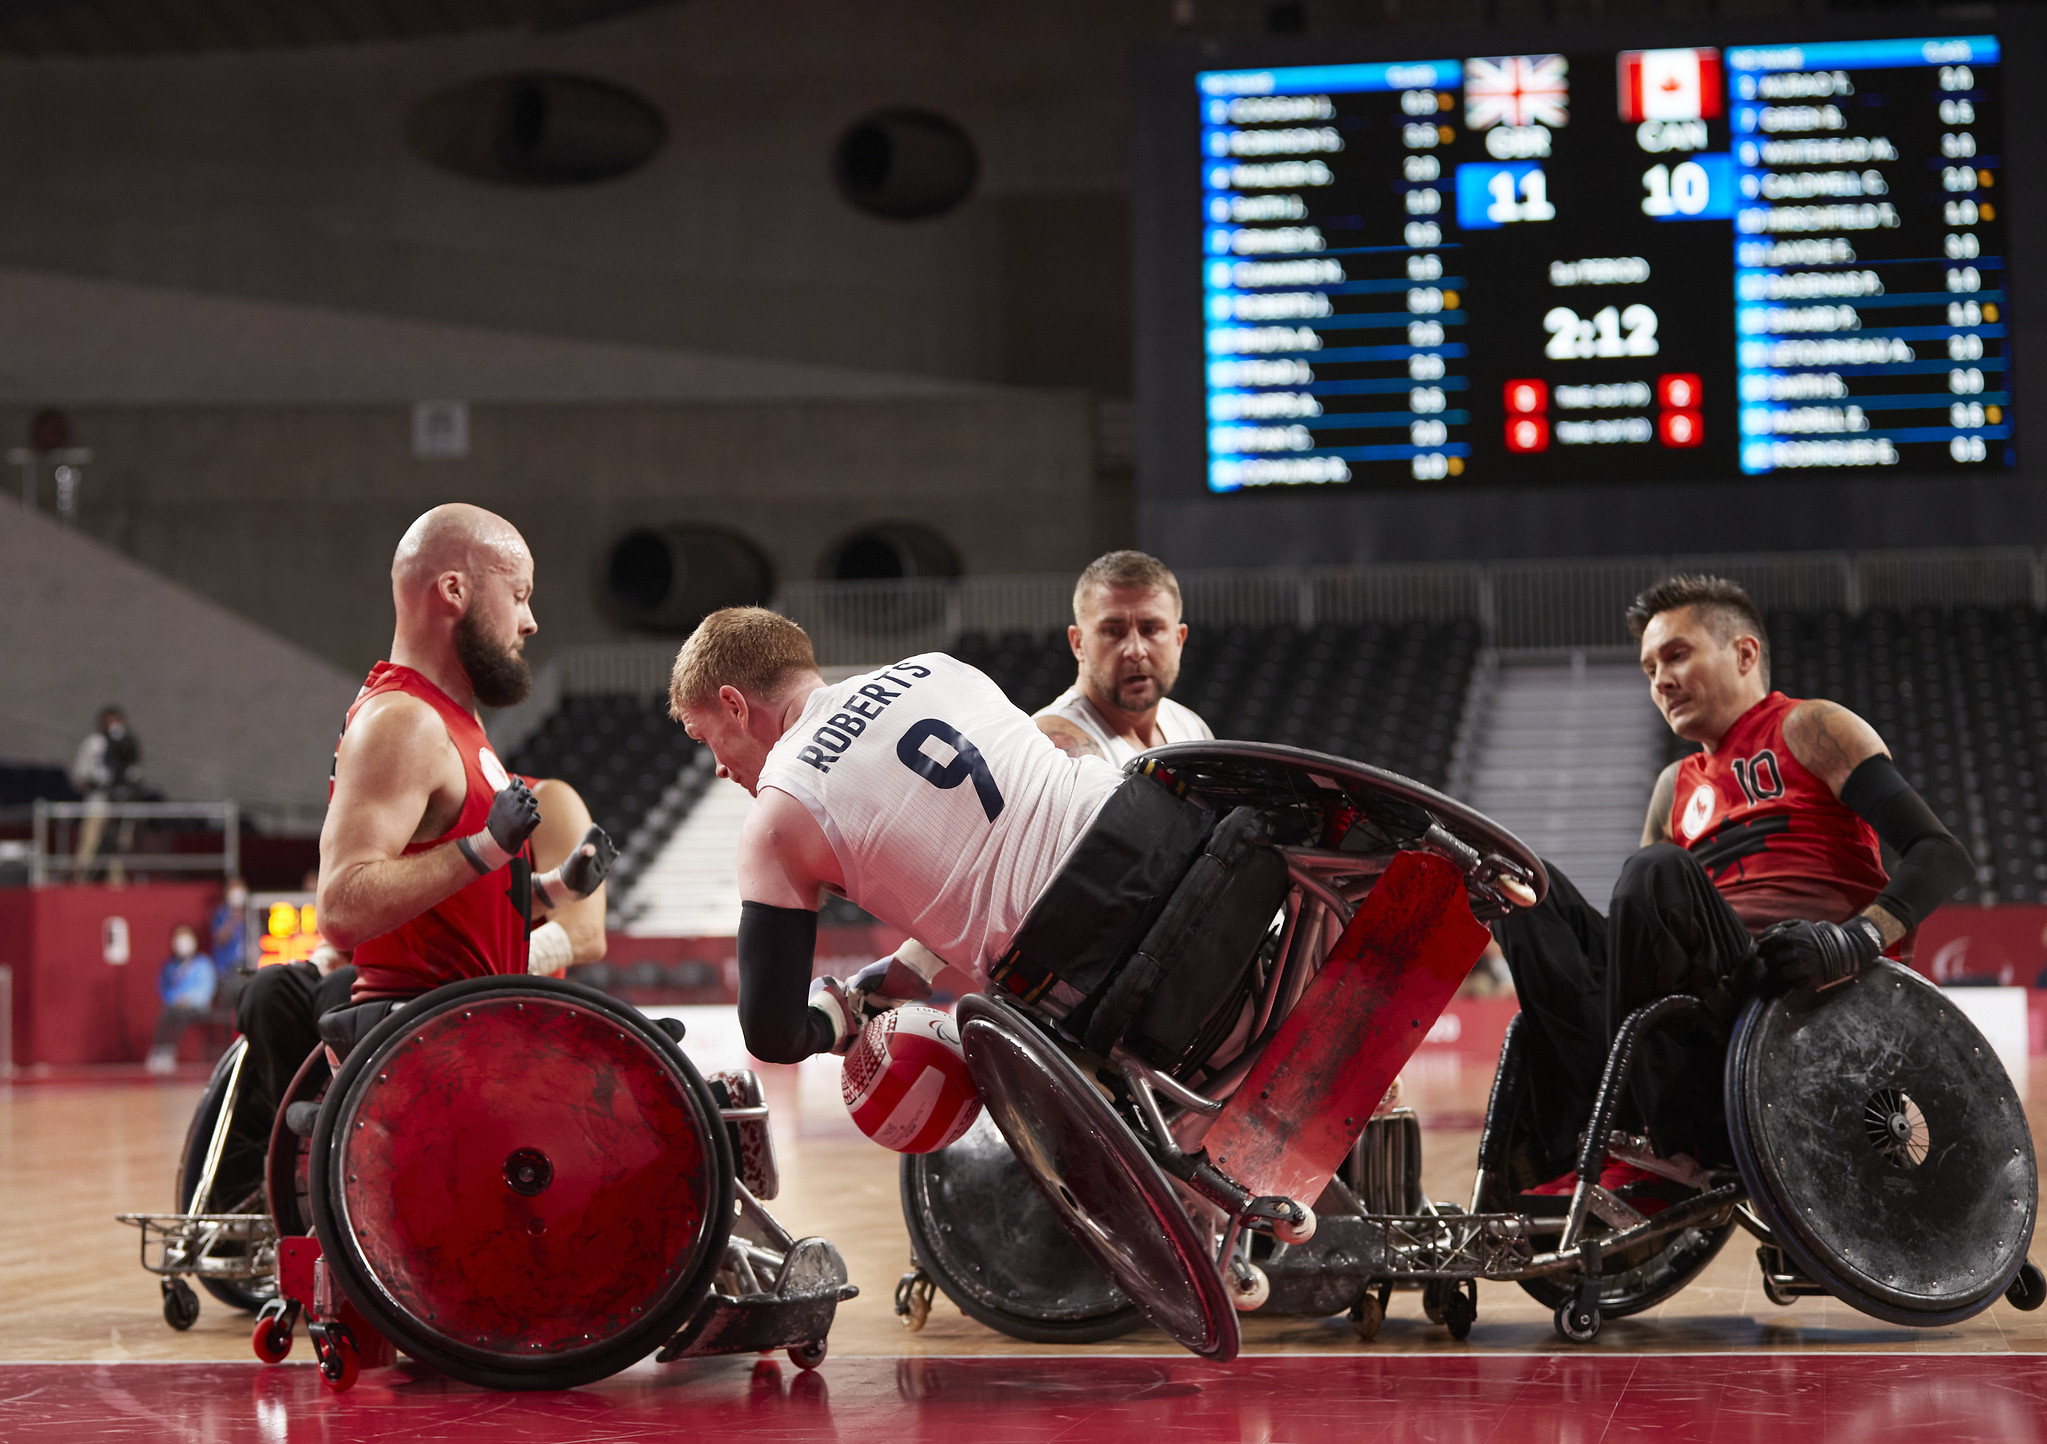 Stu and other players in wheelchair rugby.